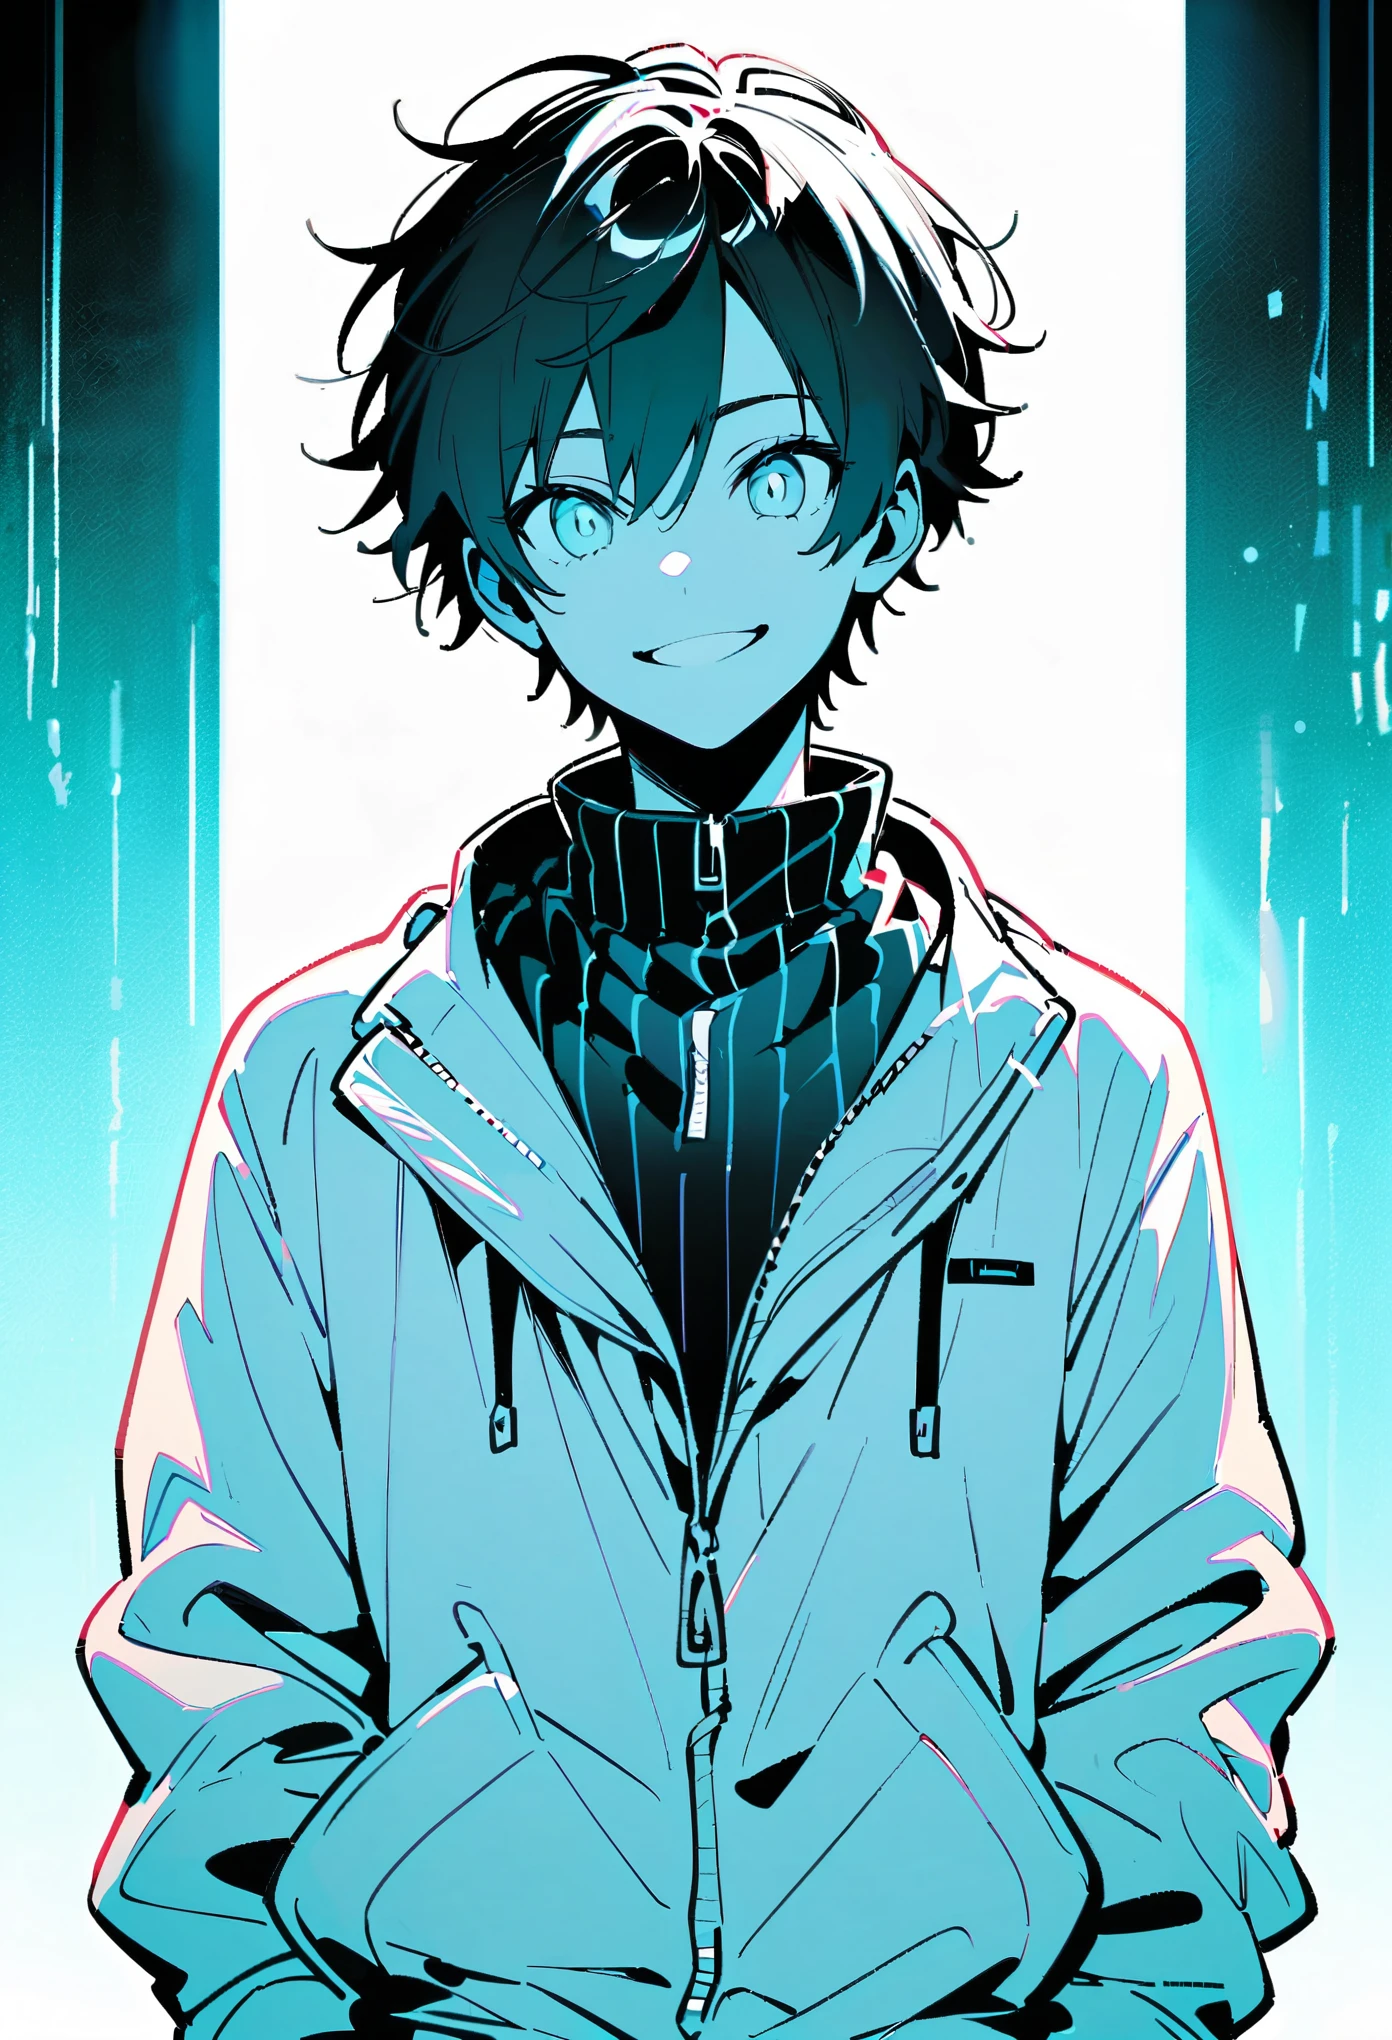 alone, View your viewers, smile, One boy, Jacket, Monochrome, Men&#39;s Center, Lips parted, Shine, Portraiture, Shine eyes, Spot colors, High collar, Shine eye, Red Theme ,Anime type and high details